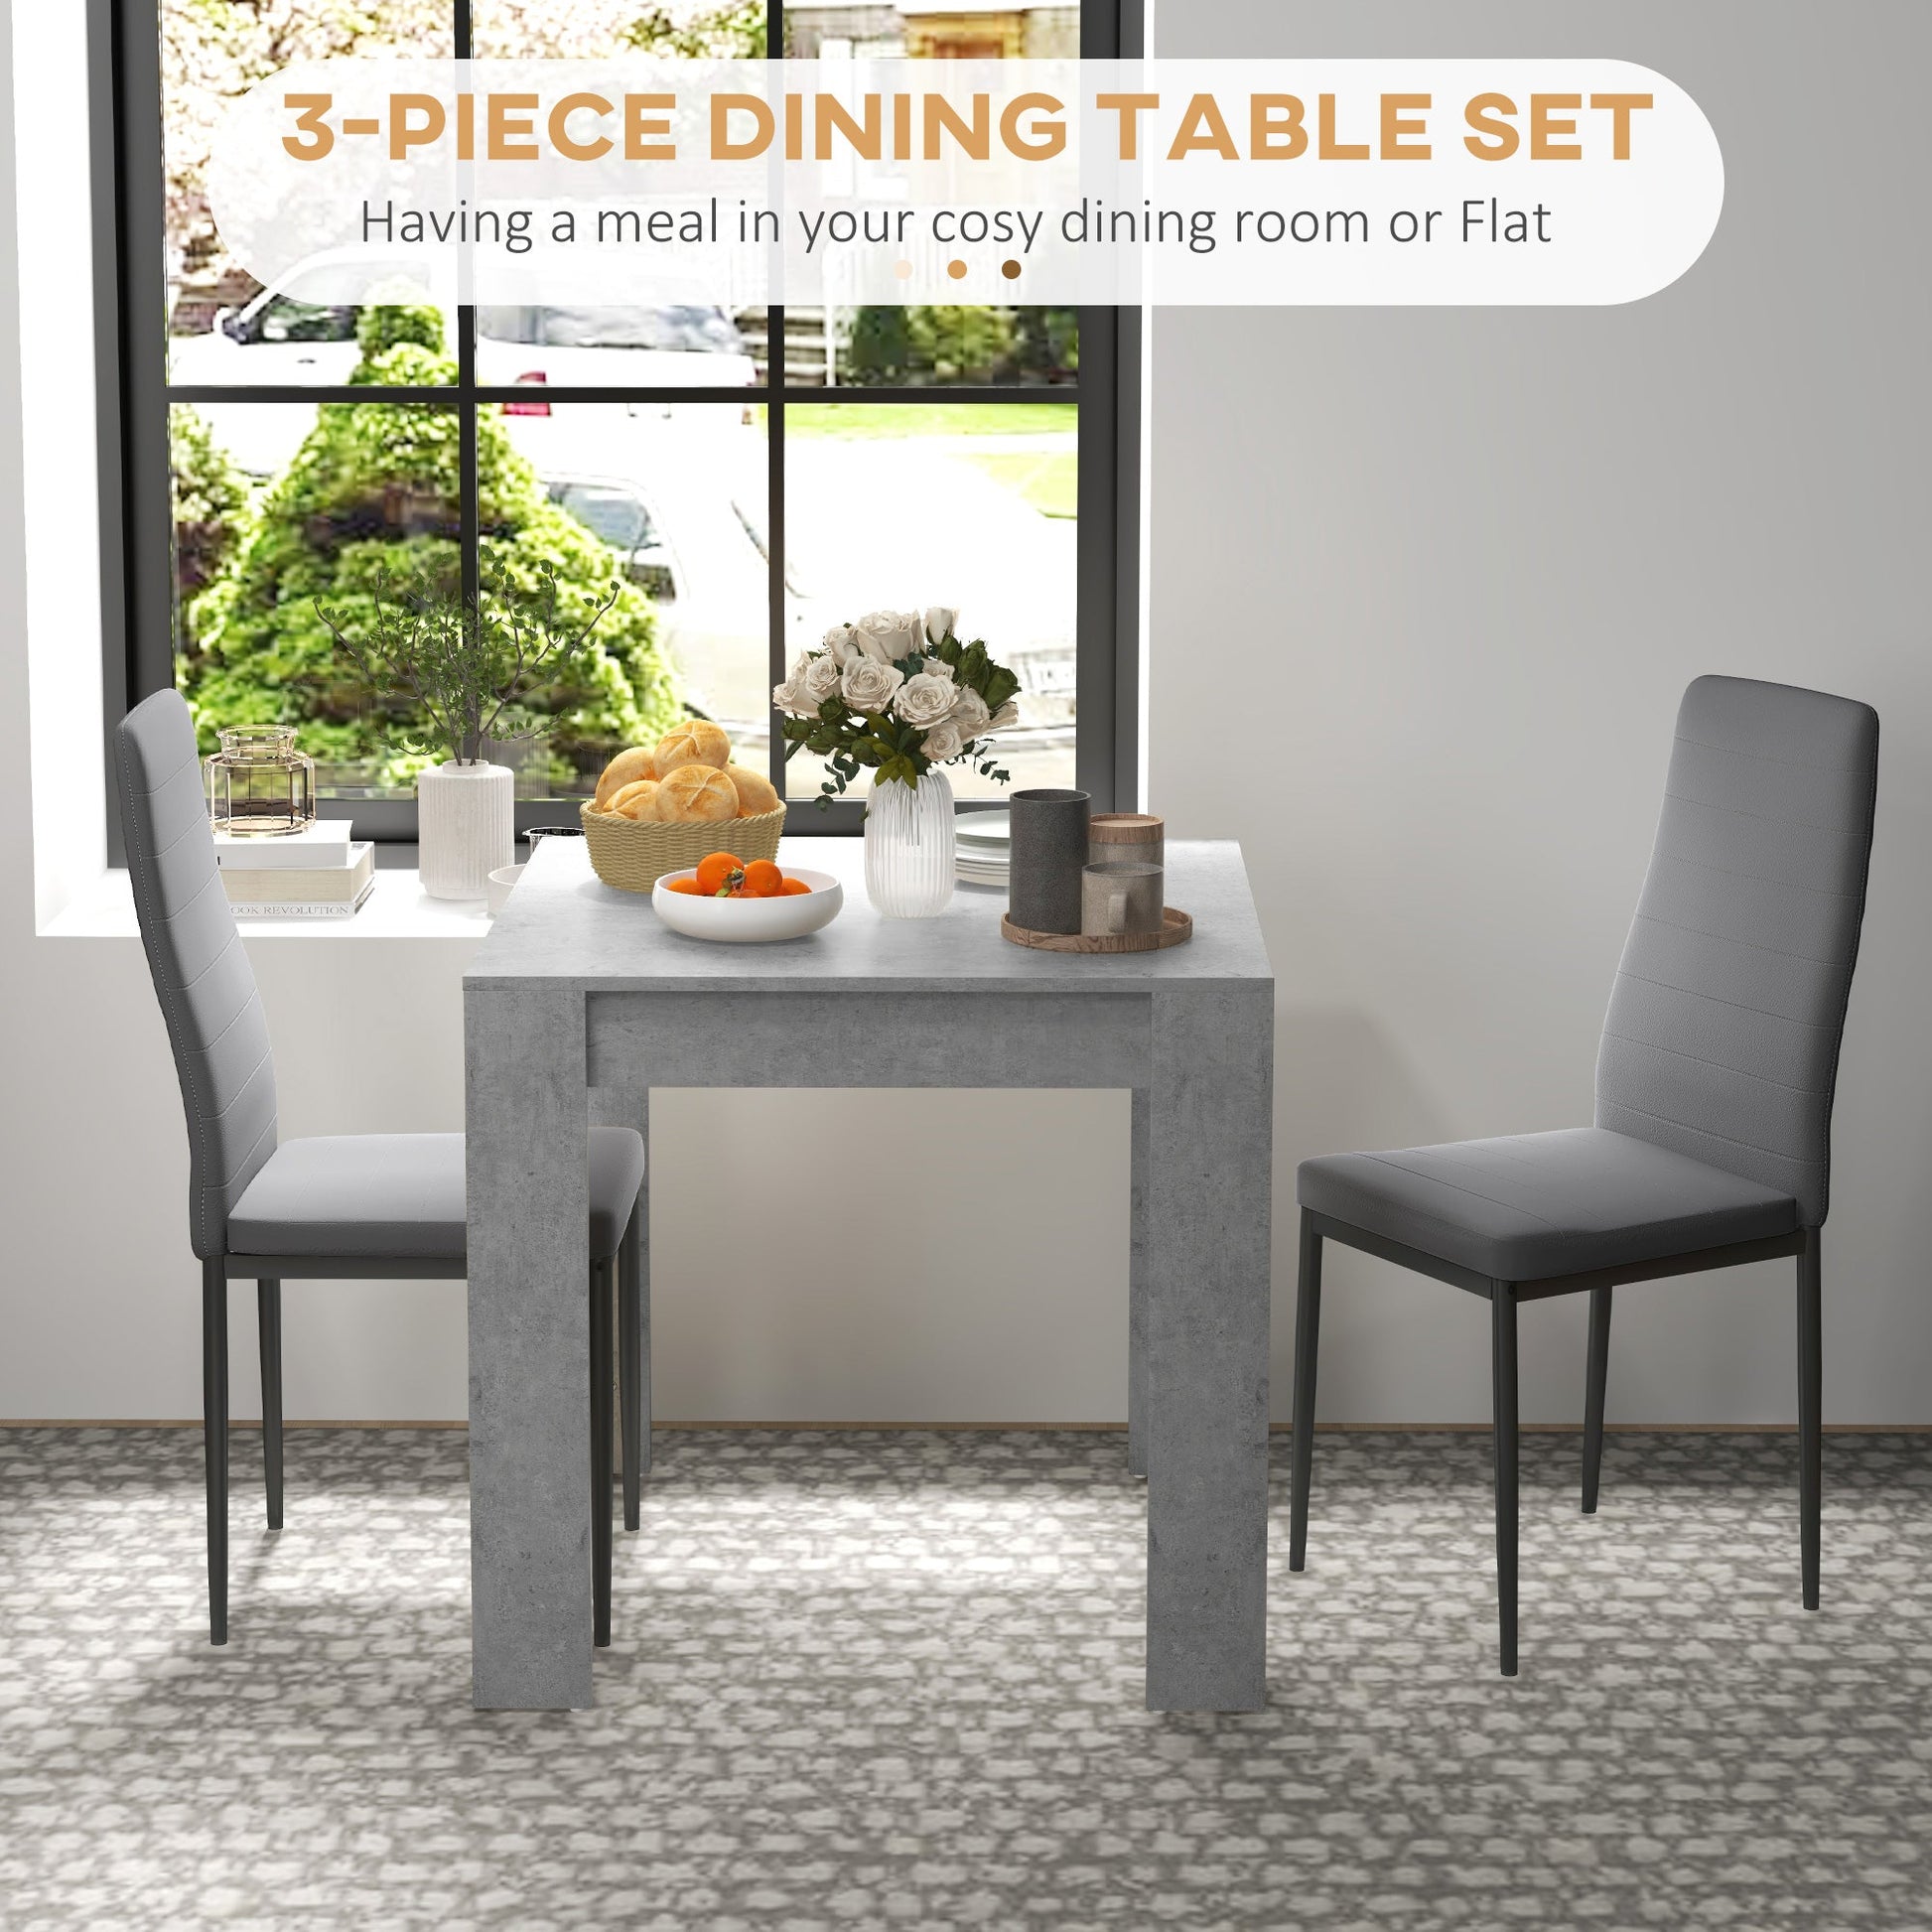 Dining Table Set for 2, Square Kitchen Table and Chairs, Faux Cement Dining Room Table and PU Leather Upholstered Chairs at Gallery Canada